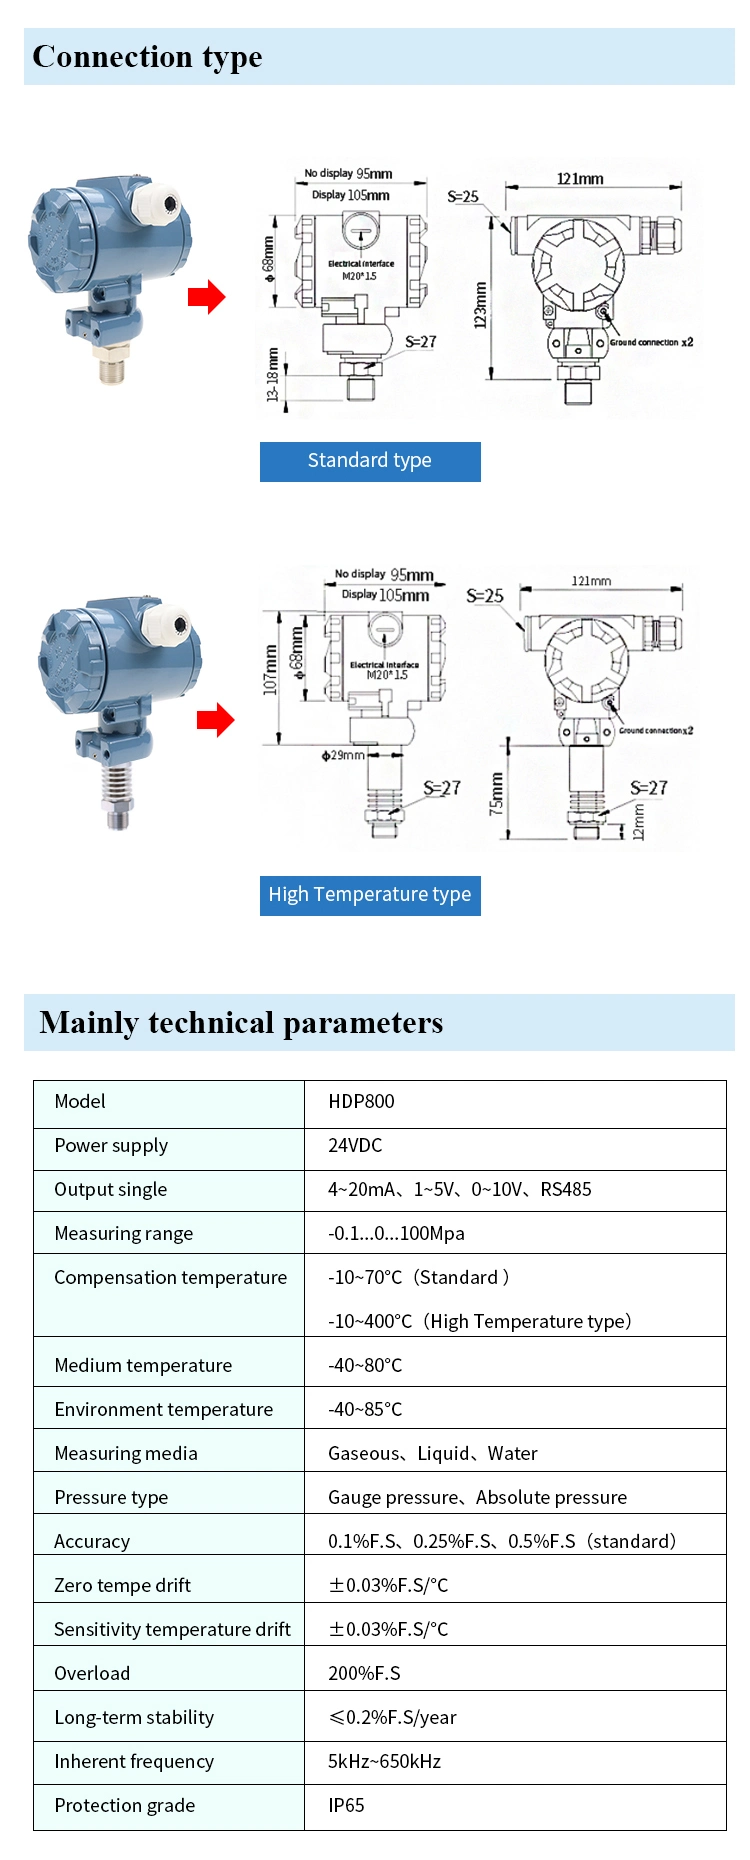 2 Wires Loop Powered Pressure Transducer 16bar Pressure Sensor 12bar OEM Pressure Sensor Analog Pressure Transducer